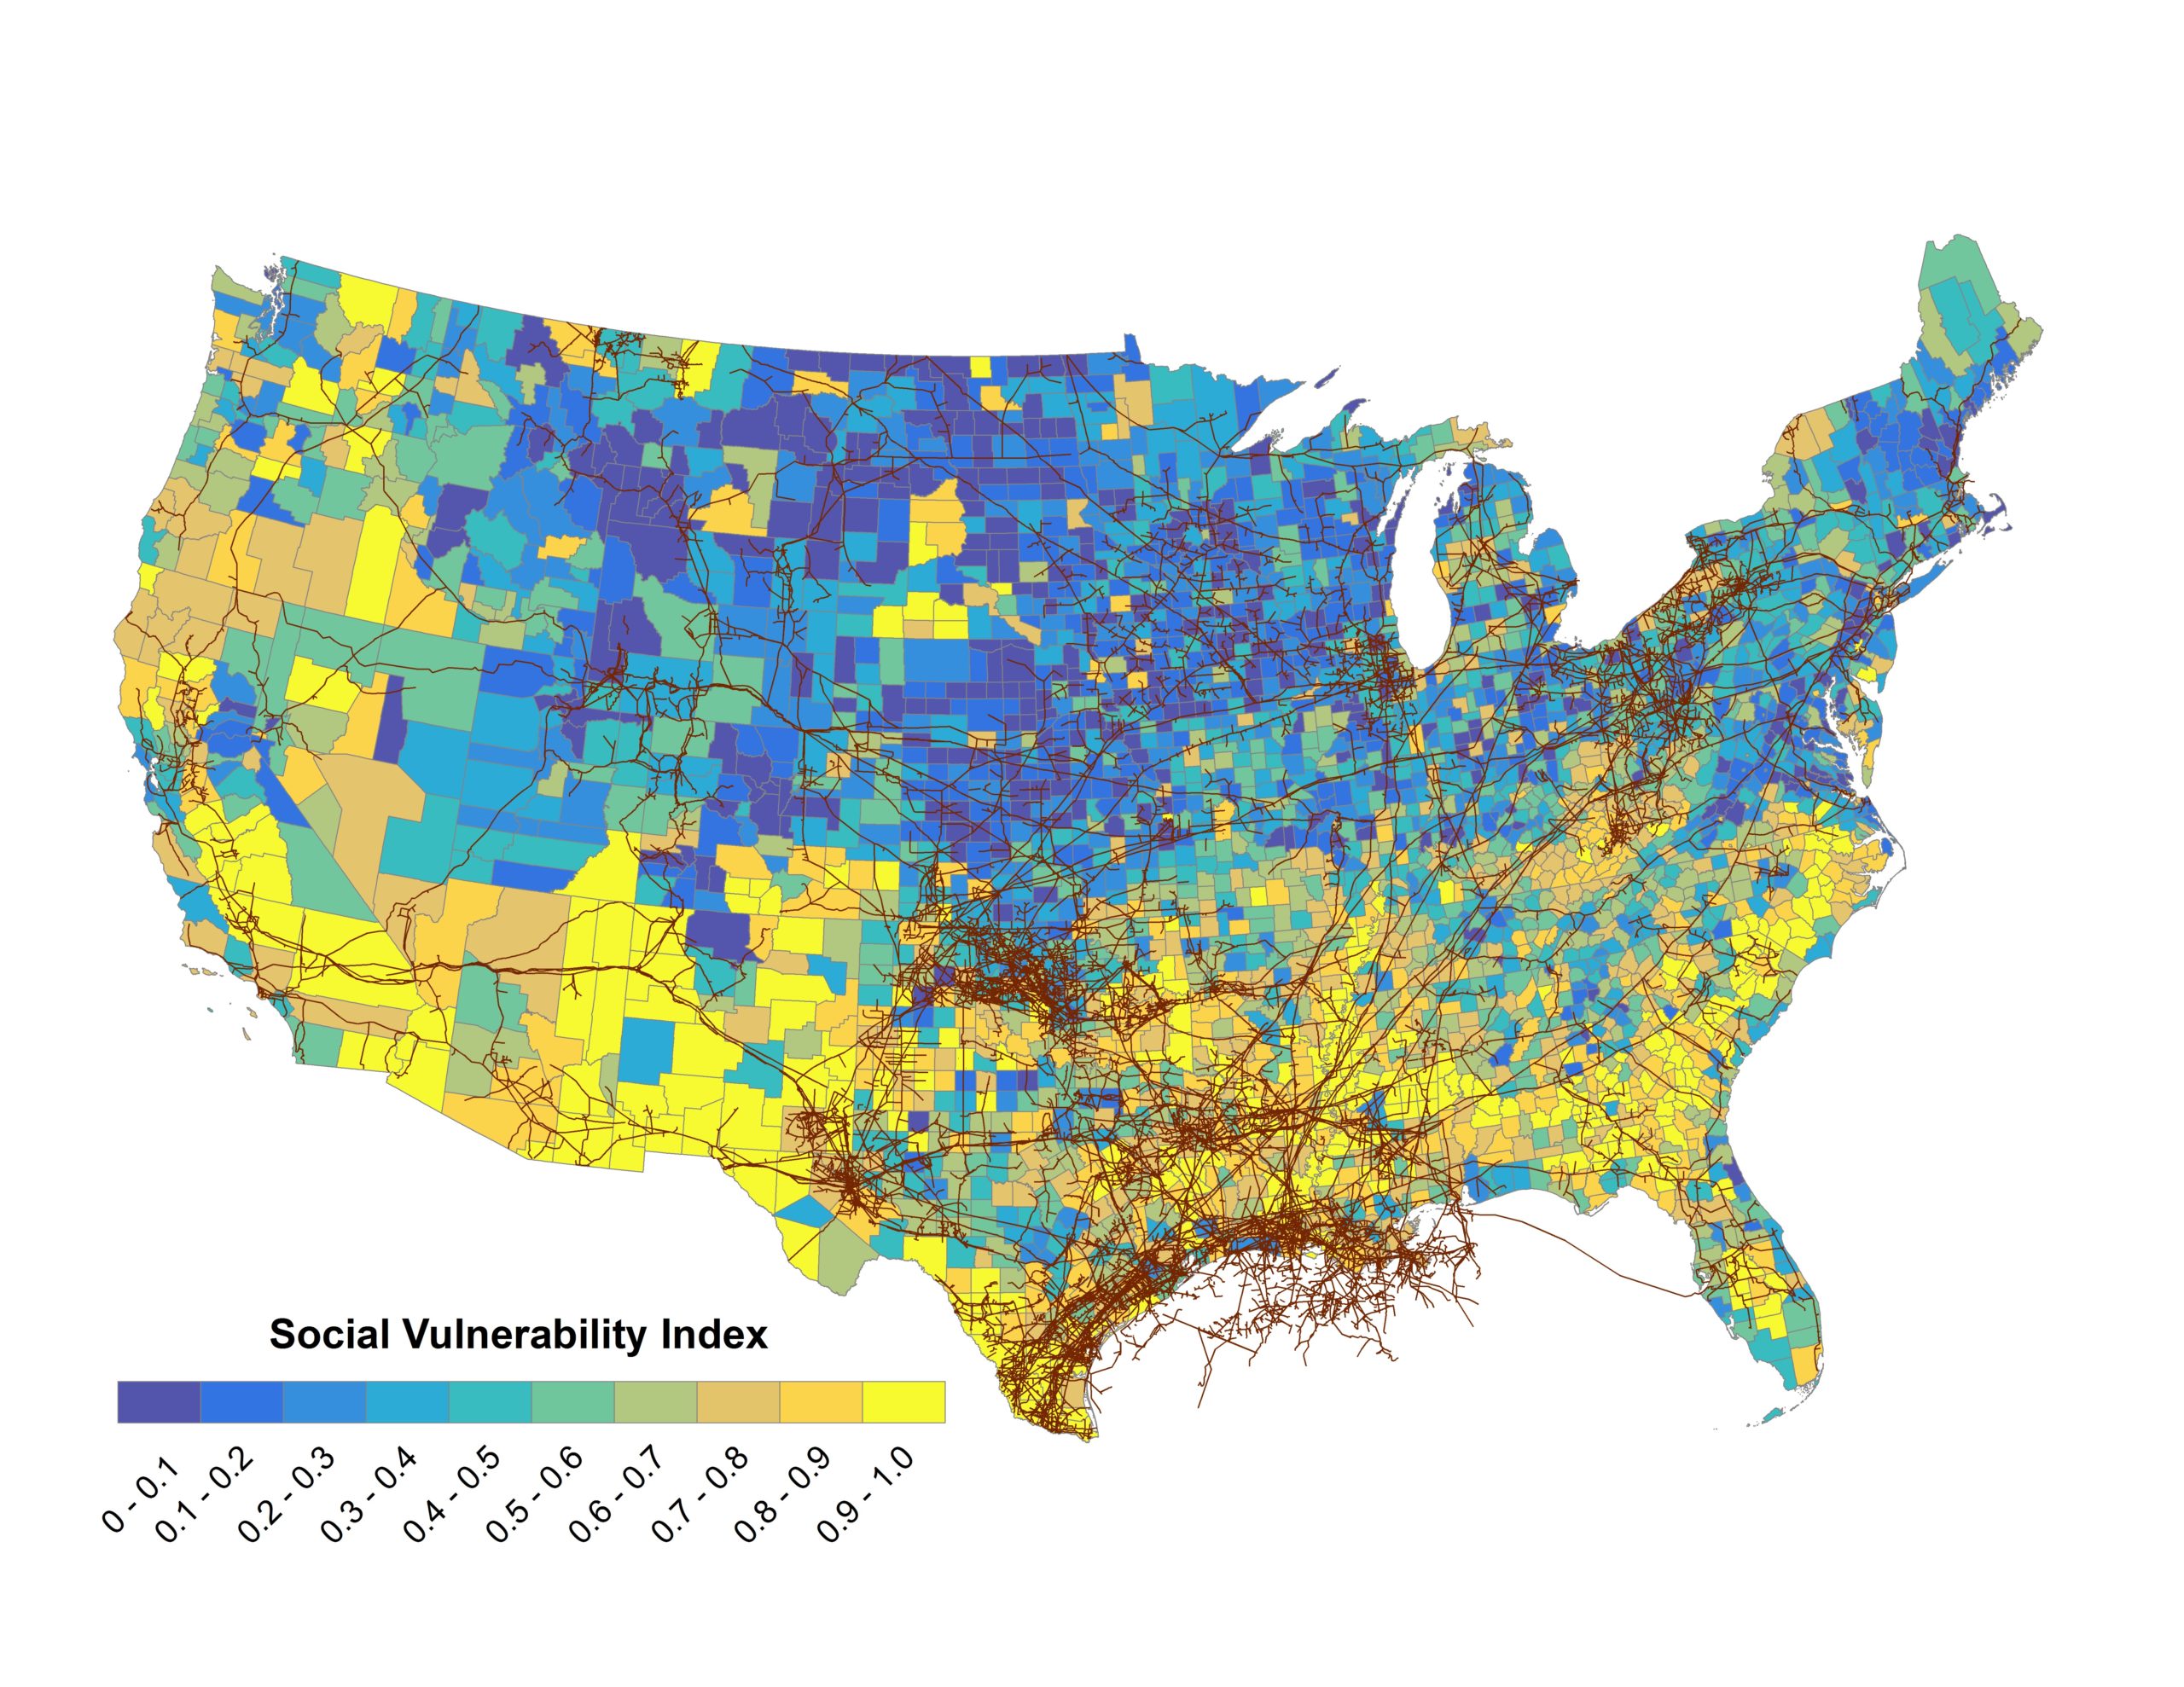 Map of conterminous United States shows pipelines in maroon and social vulnerability index on the county level in gradient colors from blue (low) to yellow (high). 